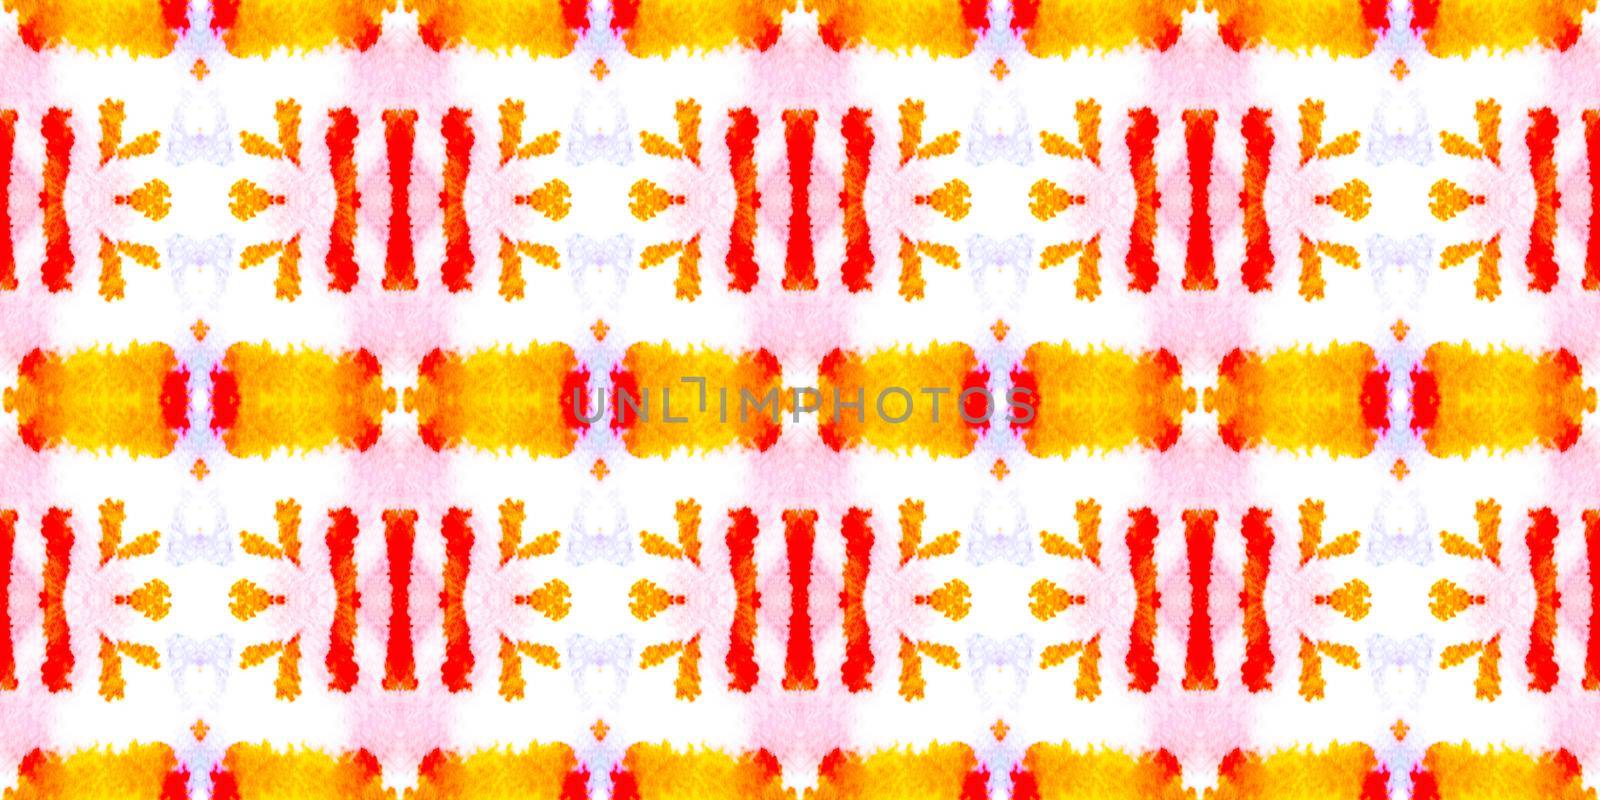 Seamless Watercolor Ethnic Pattern. Handmade Artistic Bandana Background. Colorful Summer Background. Abstract Aquarelle Tie Dye Floor. Abstract Watercolor Ethnic Print Design.